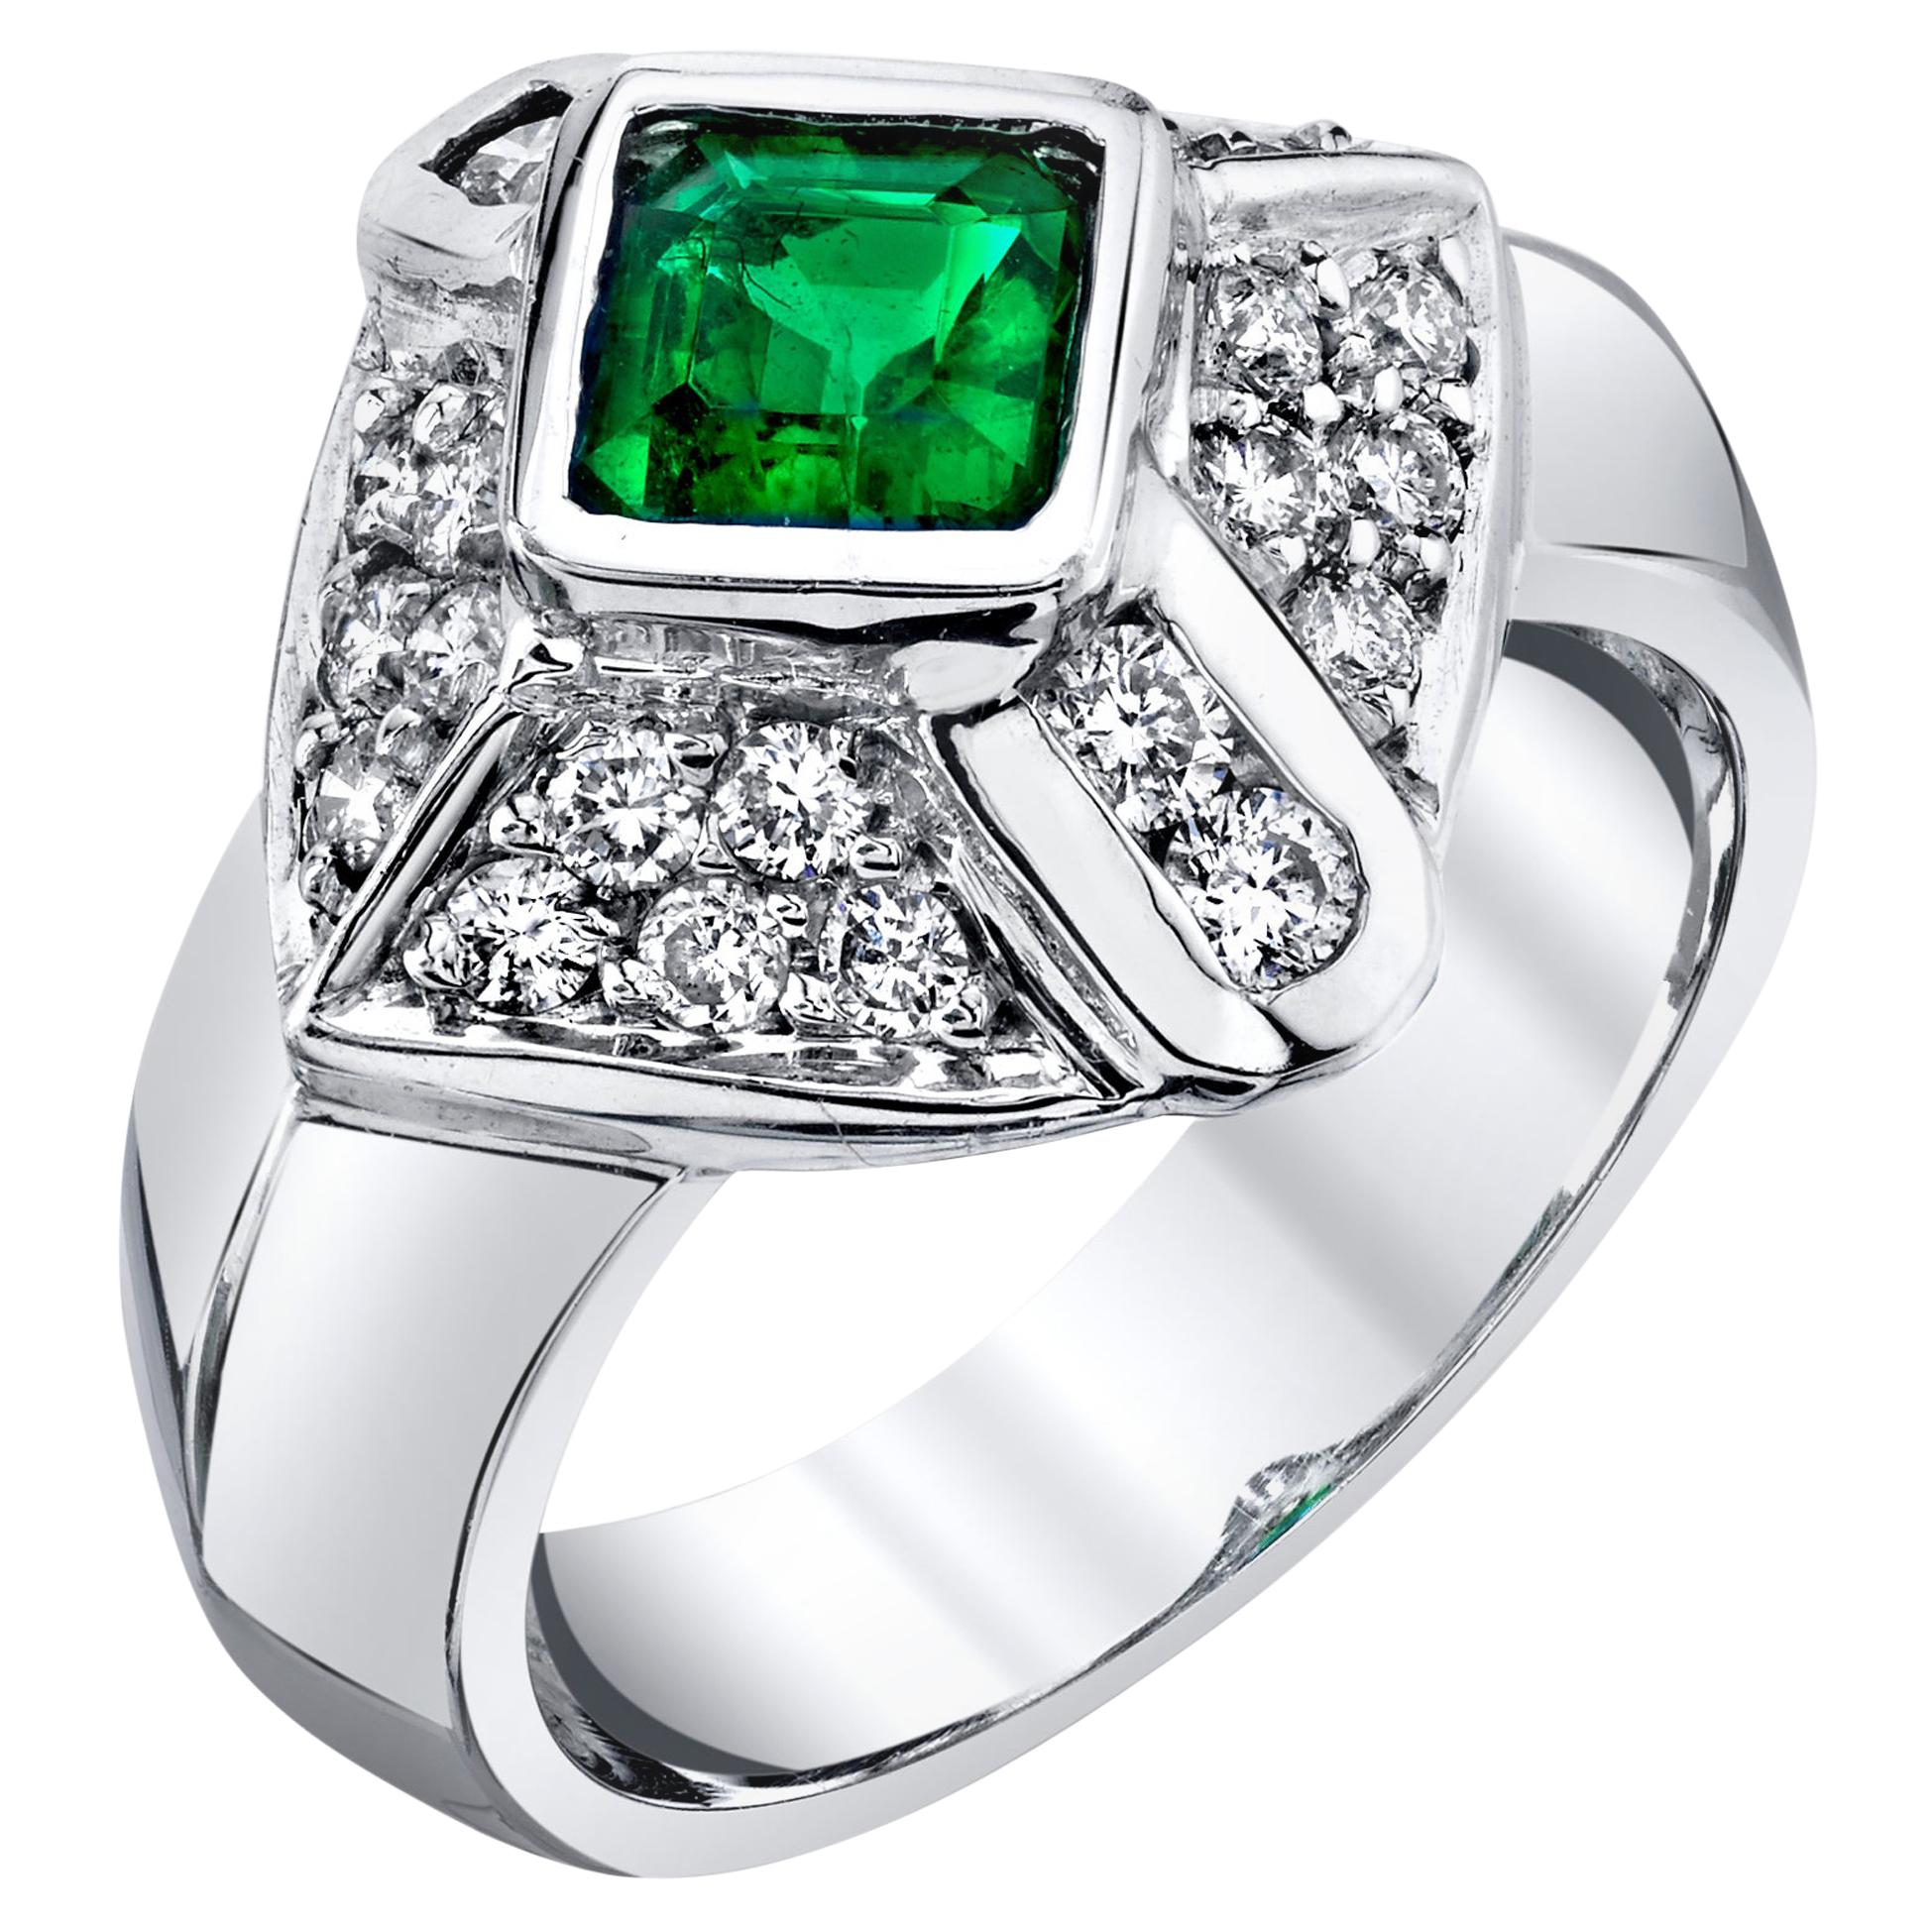 Emerald and Diamond Pave Square Cocktail Ring in 18k White Gold, .67 Carat 